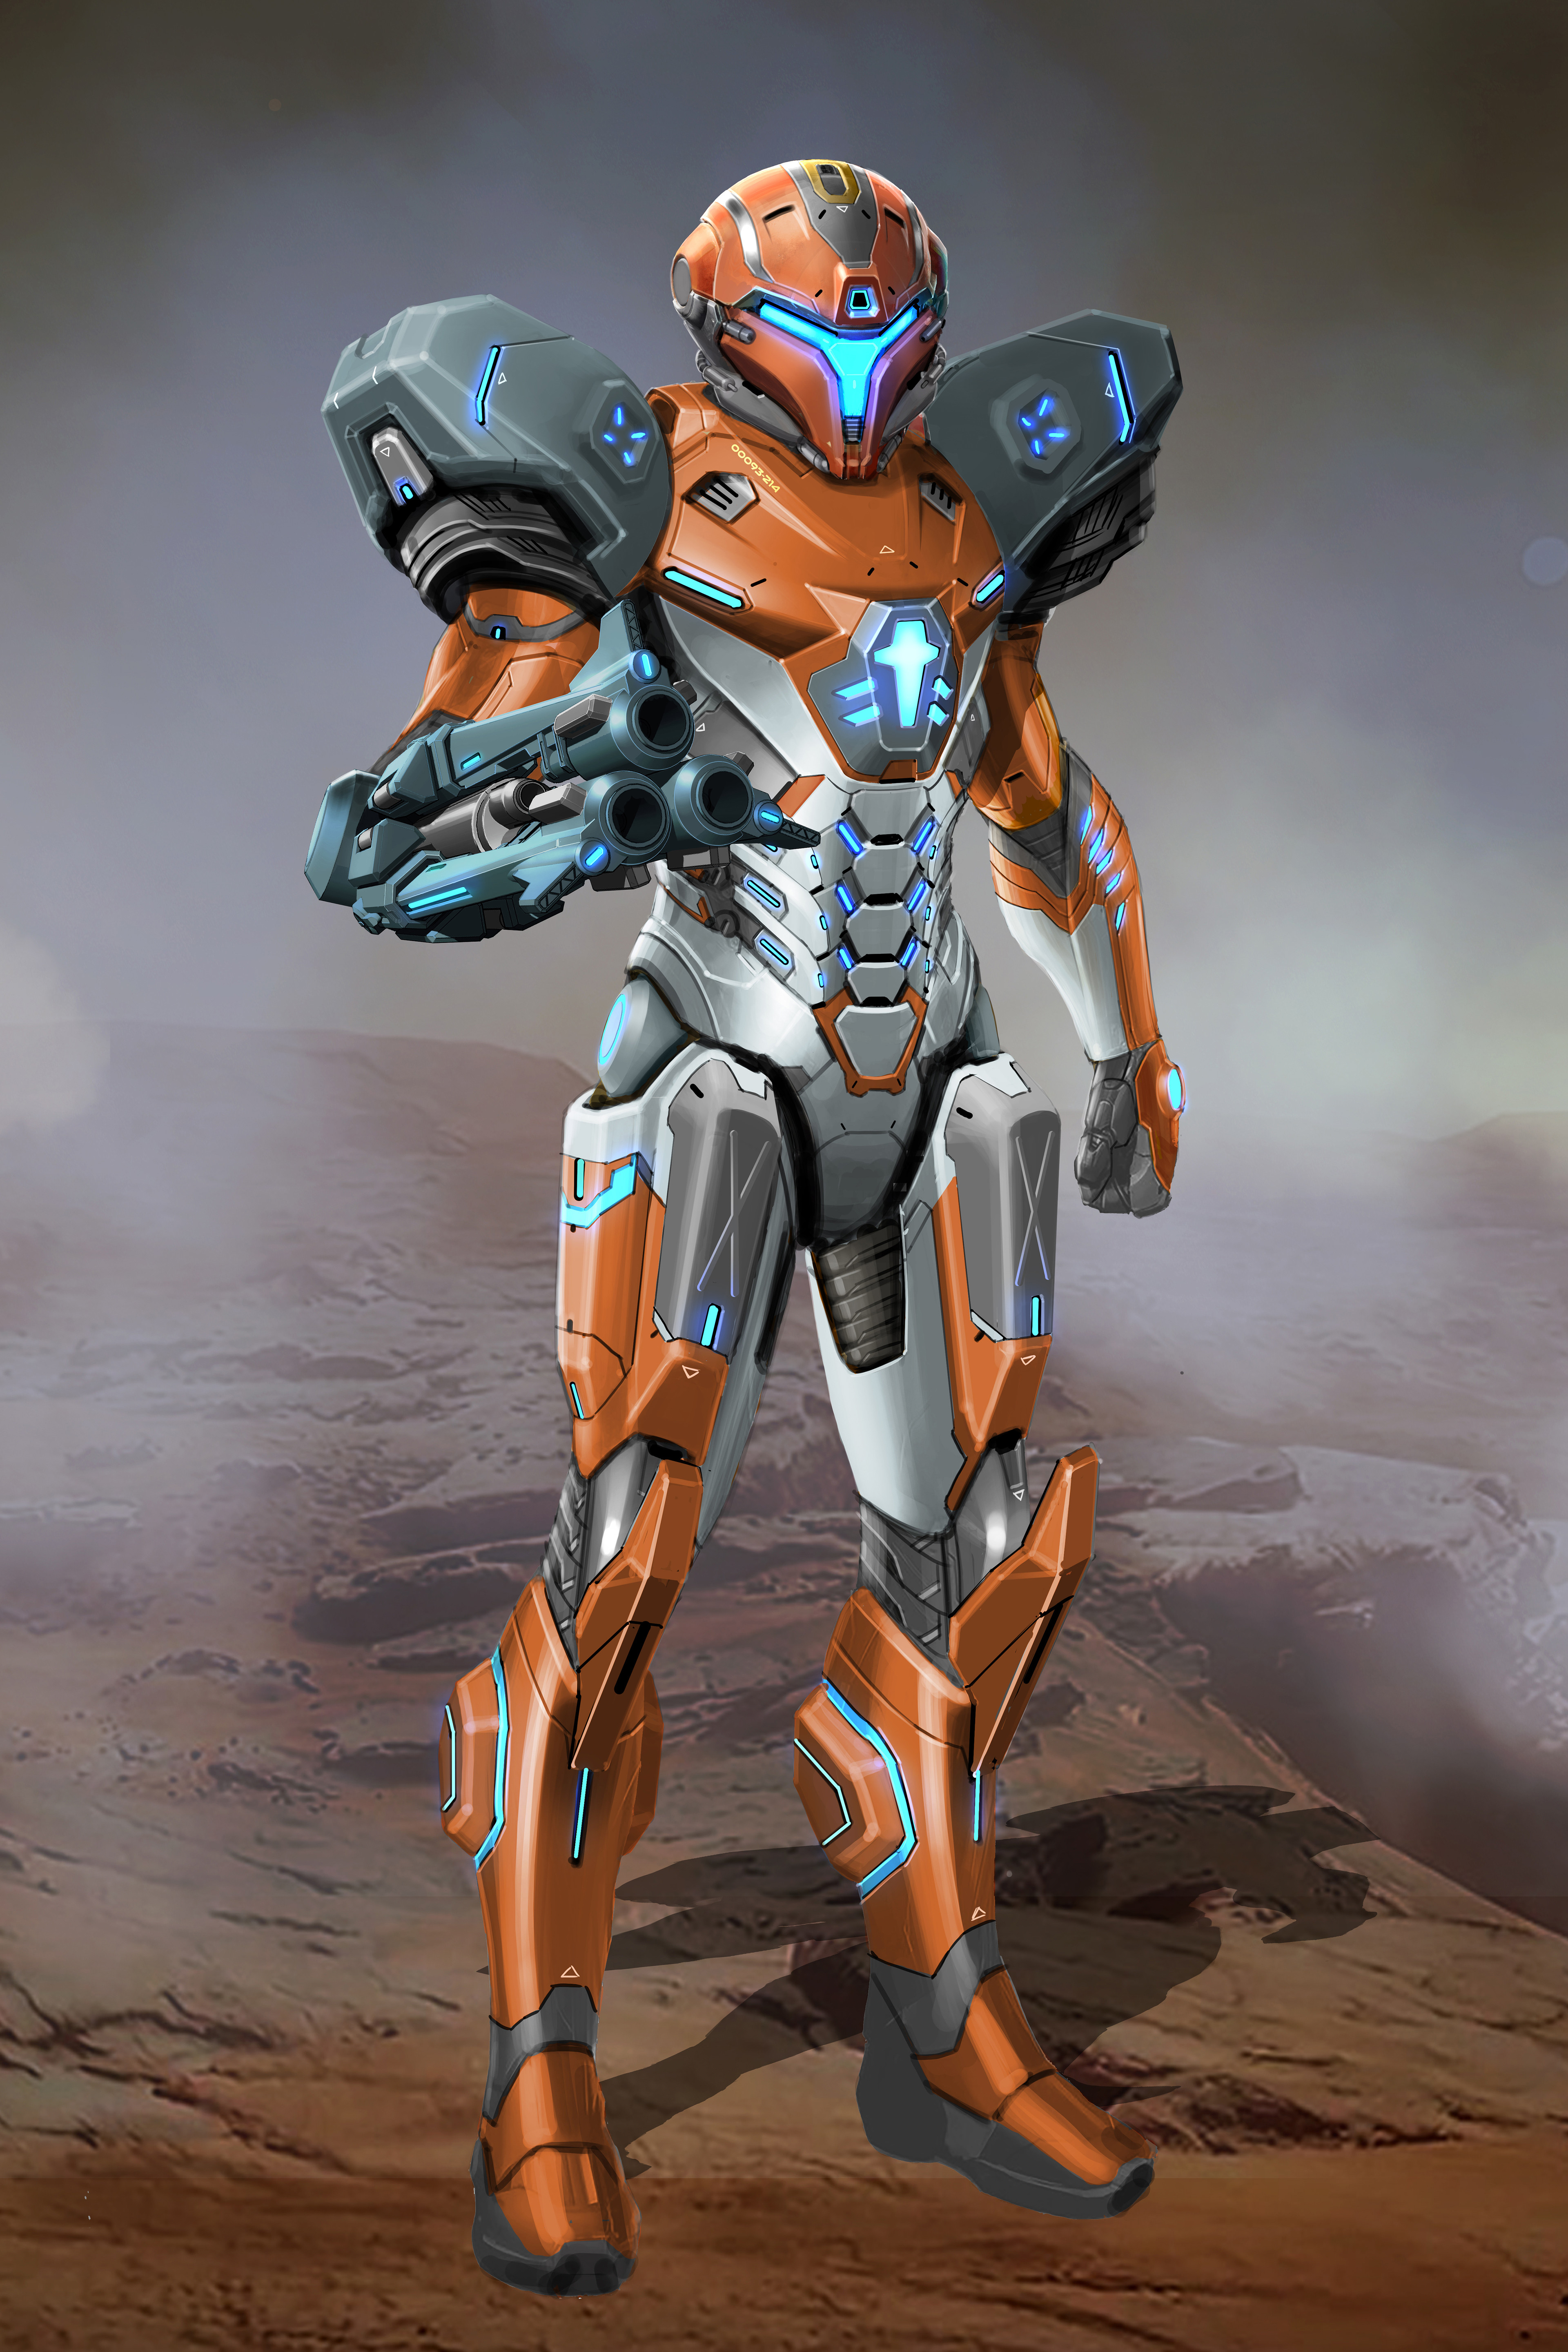 Redesign of Metroid Prime 3's PED suit. 